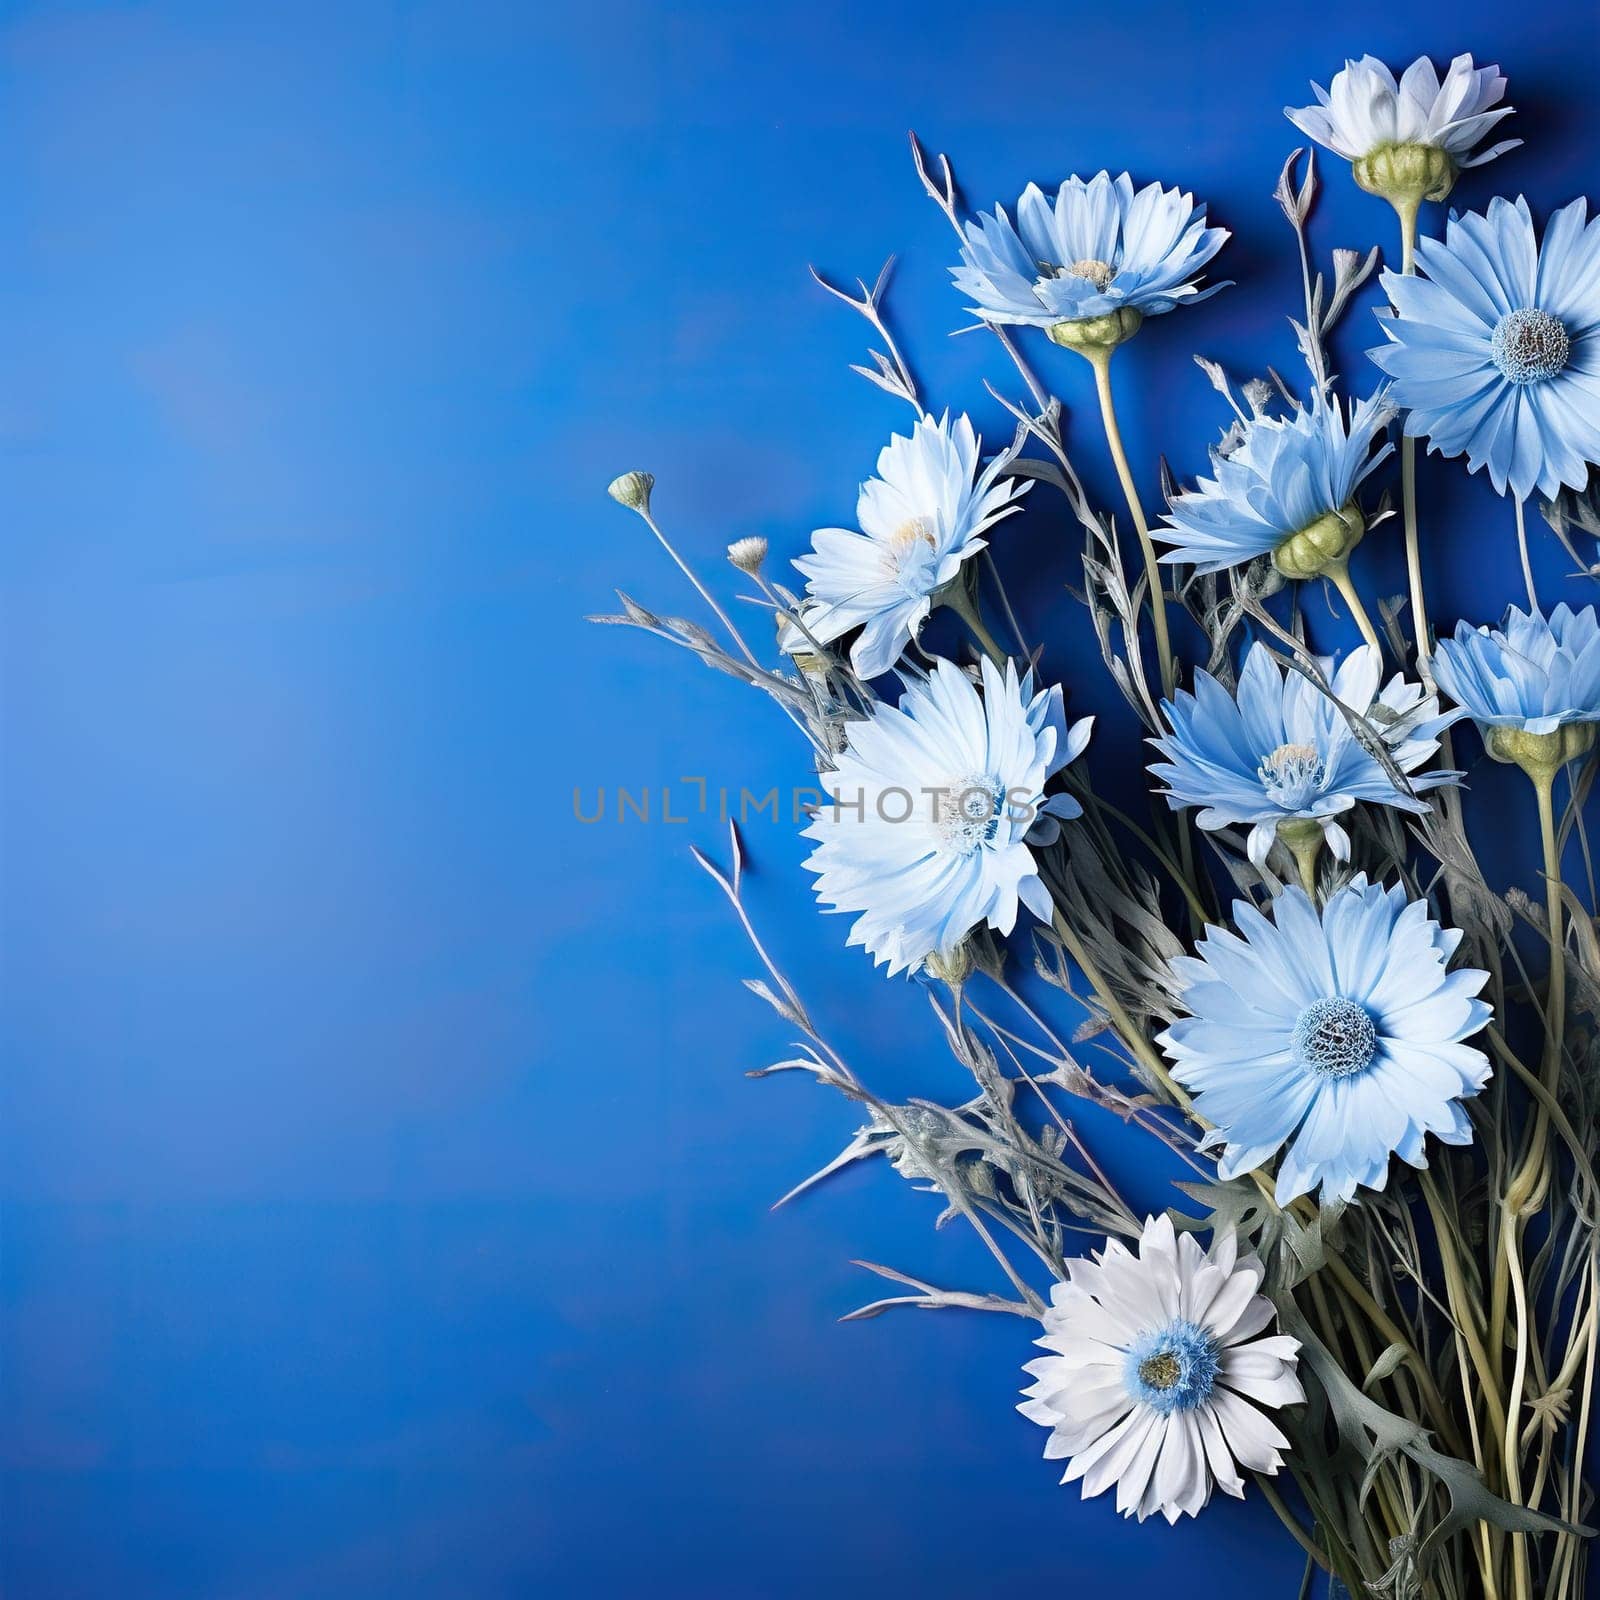 Bouquet of field cornflowers on a blue background with space for text.